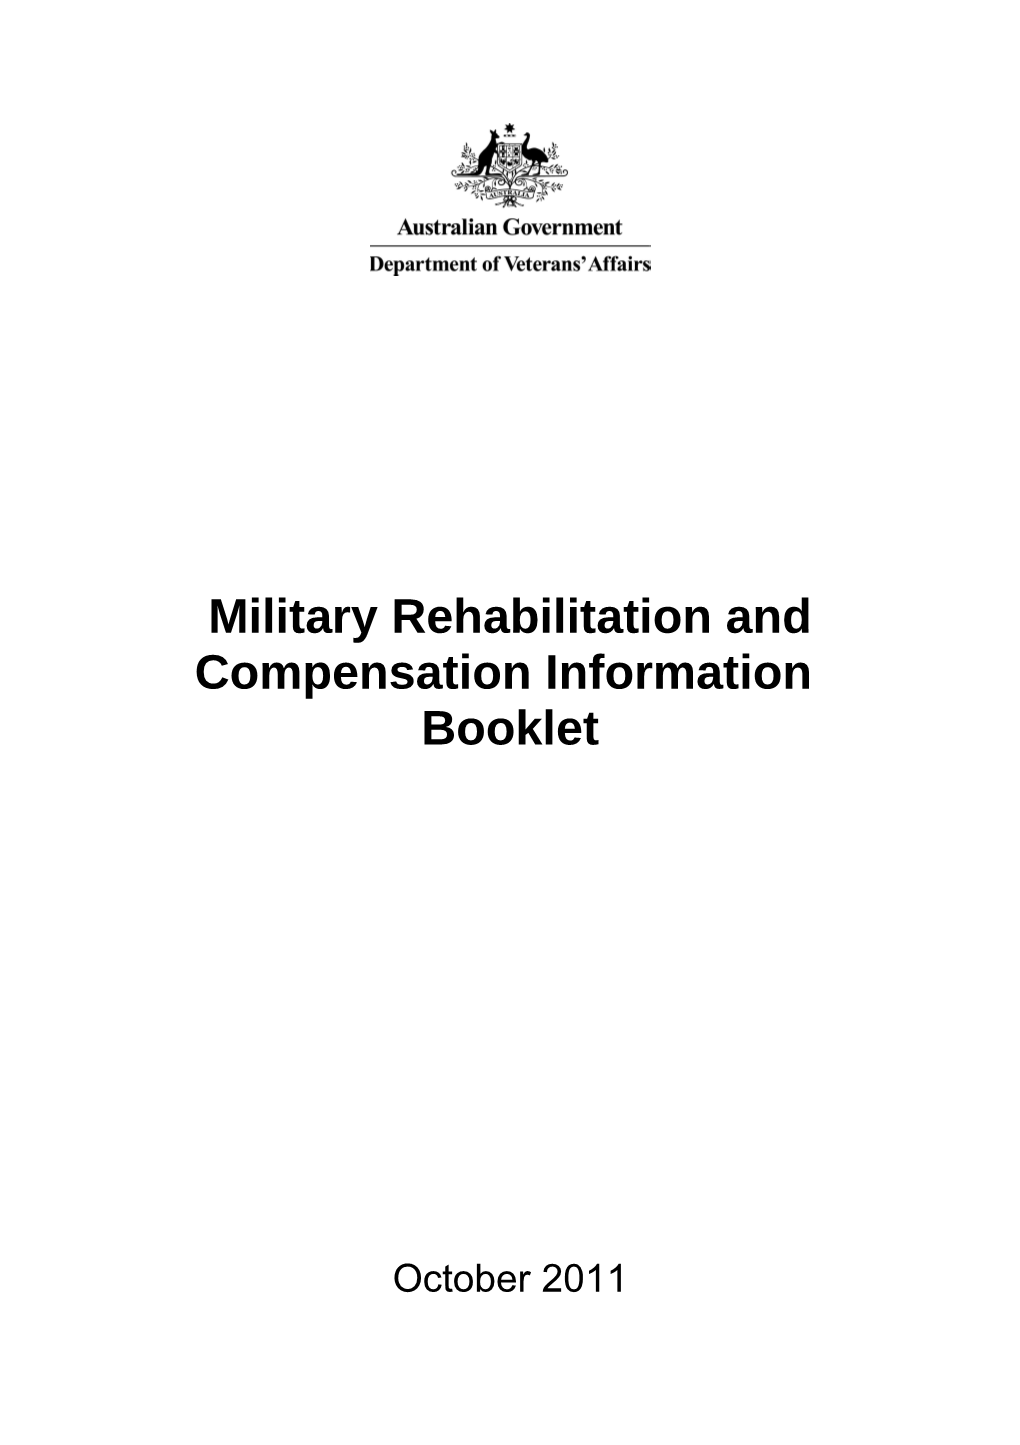 Military Rehabilitation and Compensation Information Booklet